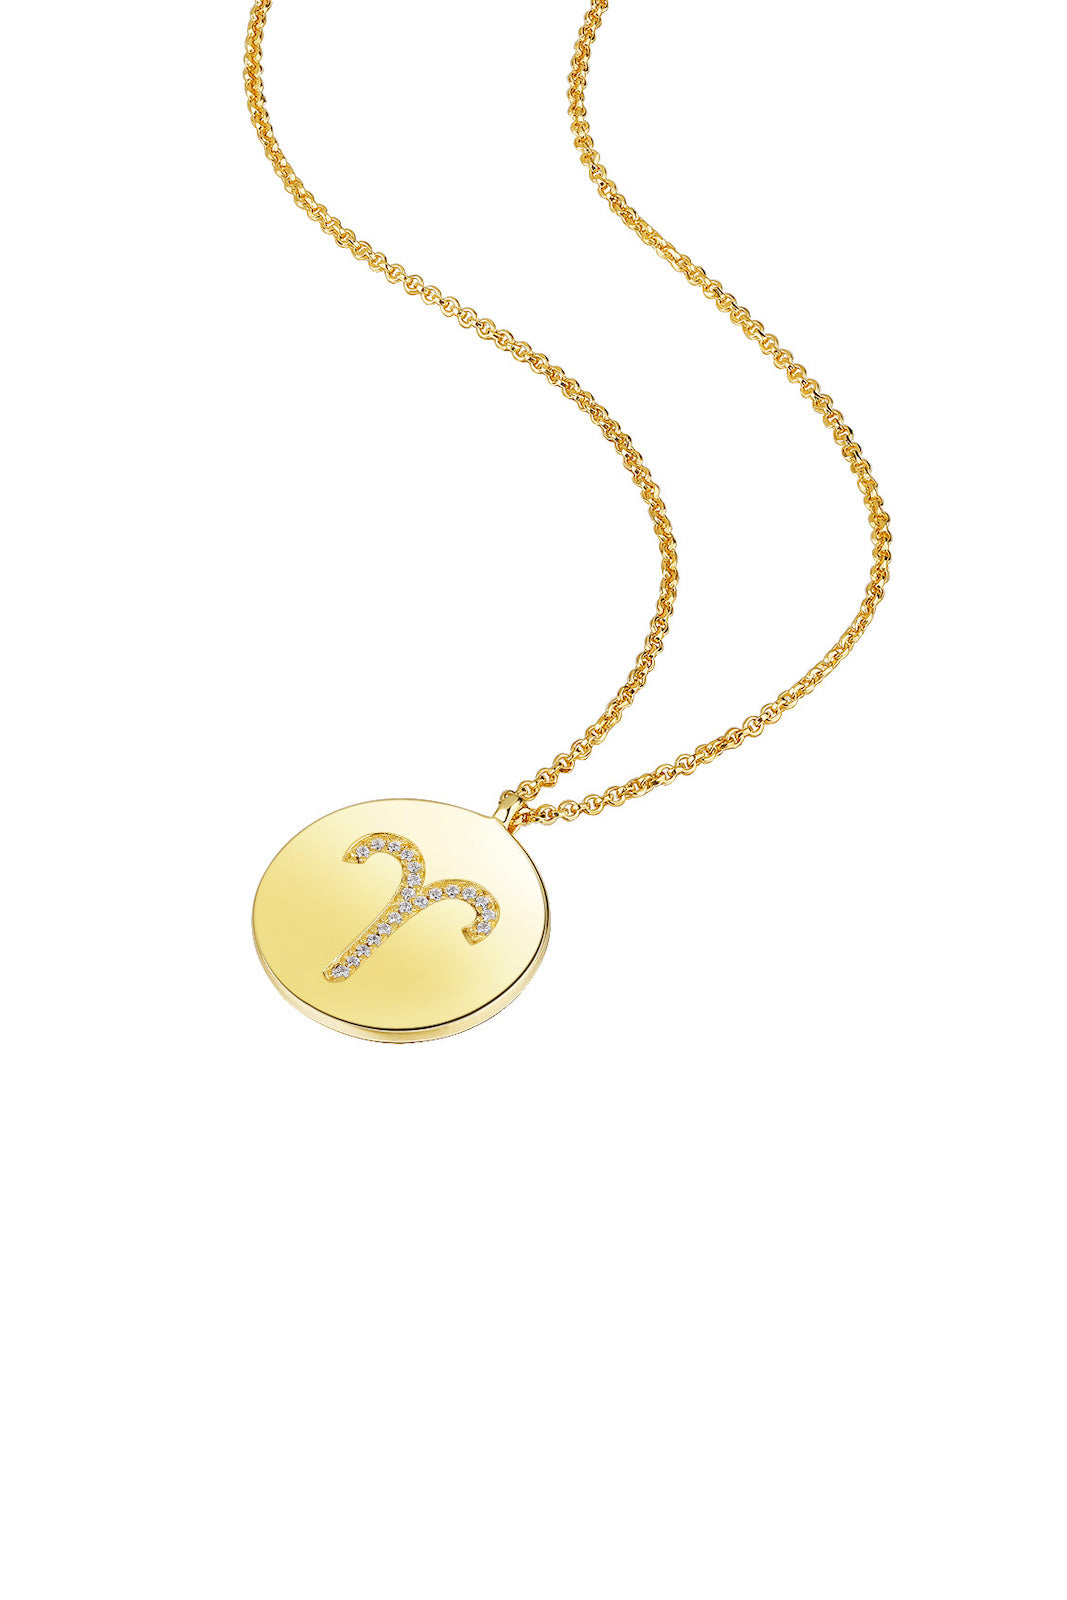 Gold Plated Silver Zodiac Necklace - Aries Side View